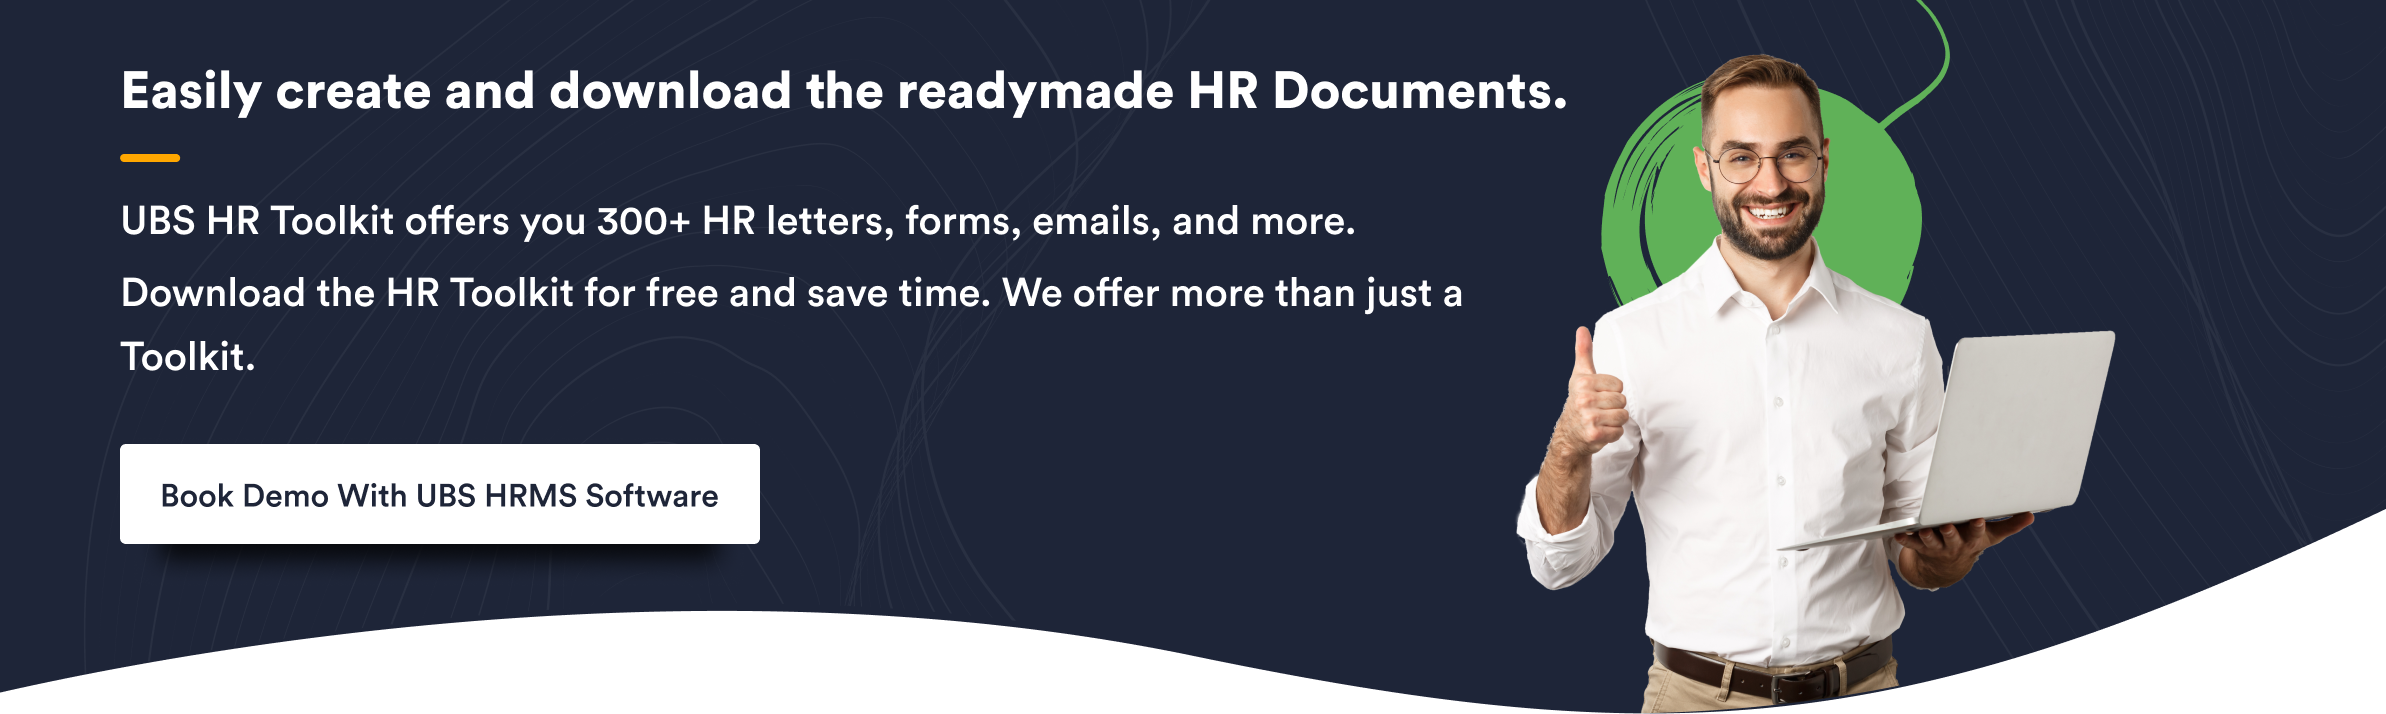 Easily create and download the readymade HR Documents.